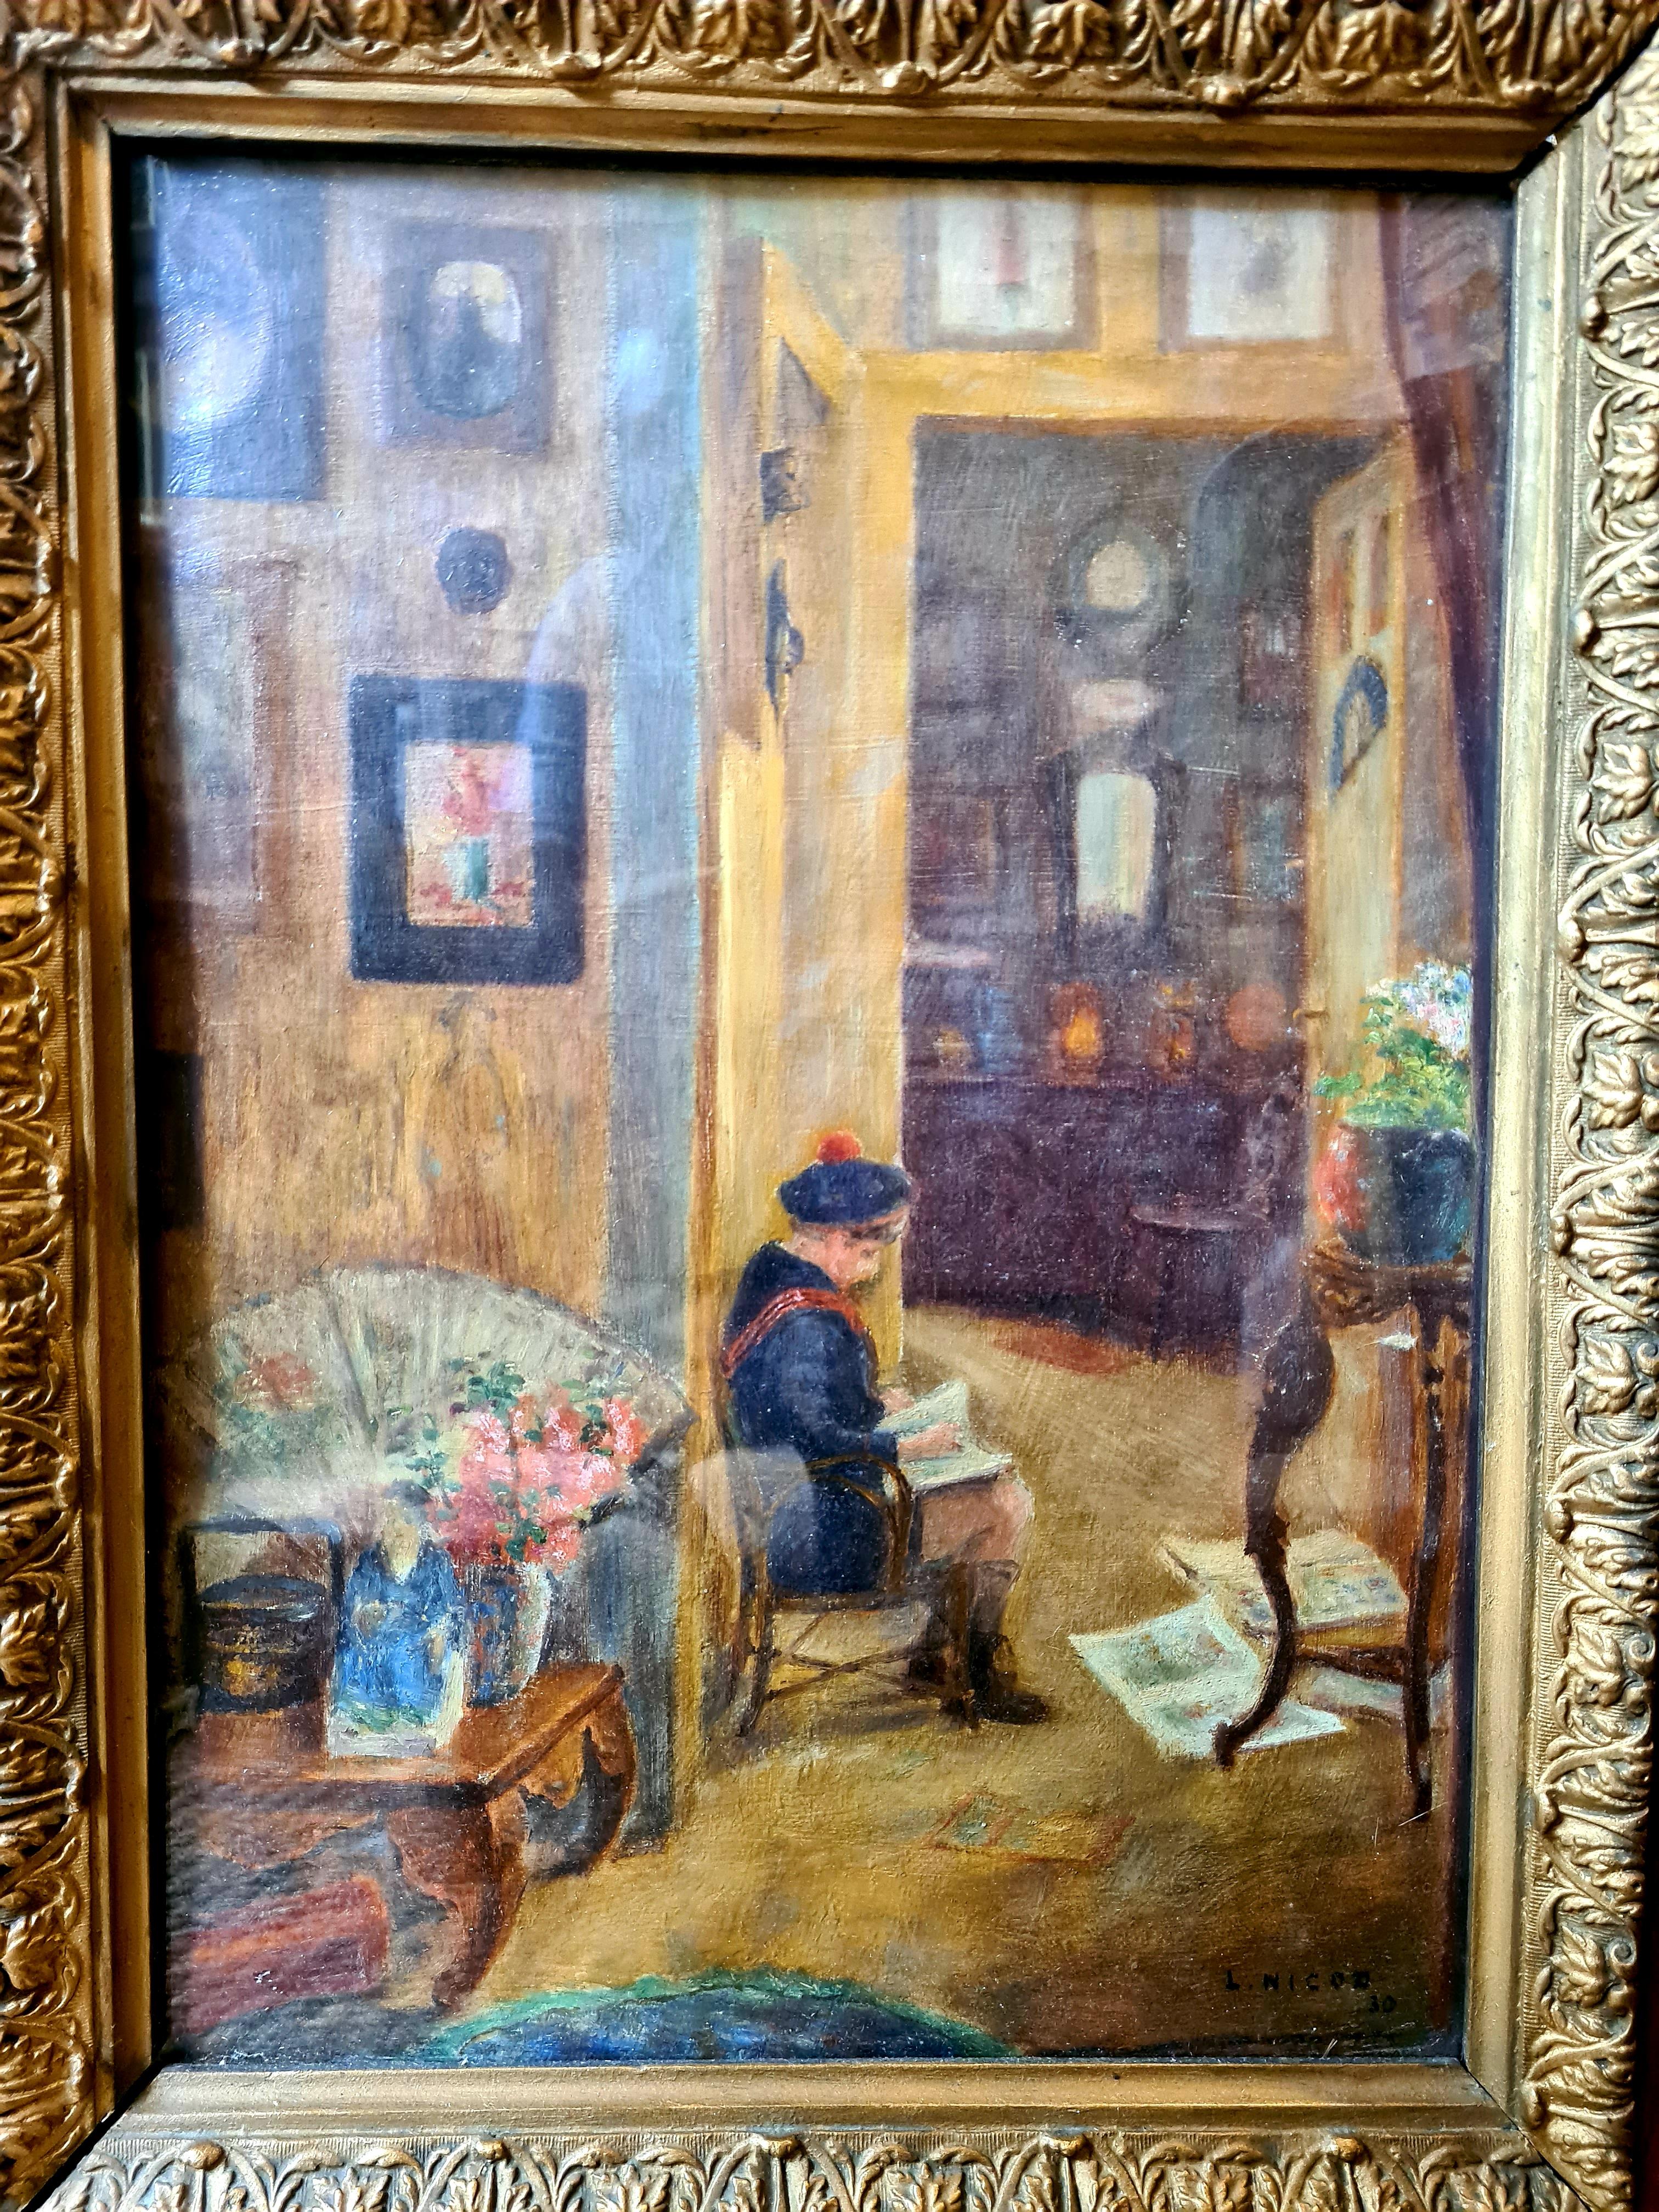 L Nicod Portrait Painting - The Young Artist, Early 20th Century French Interior View, Chateau Vesoul